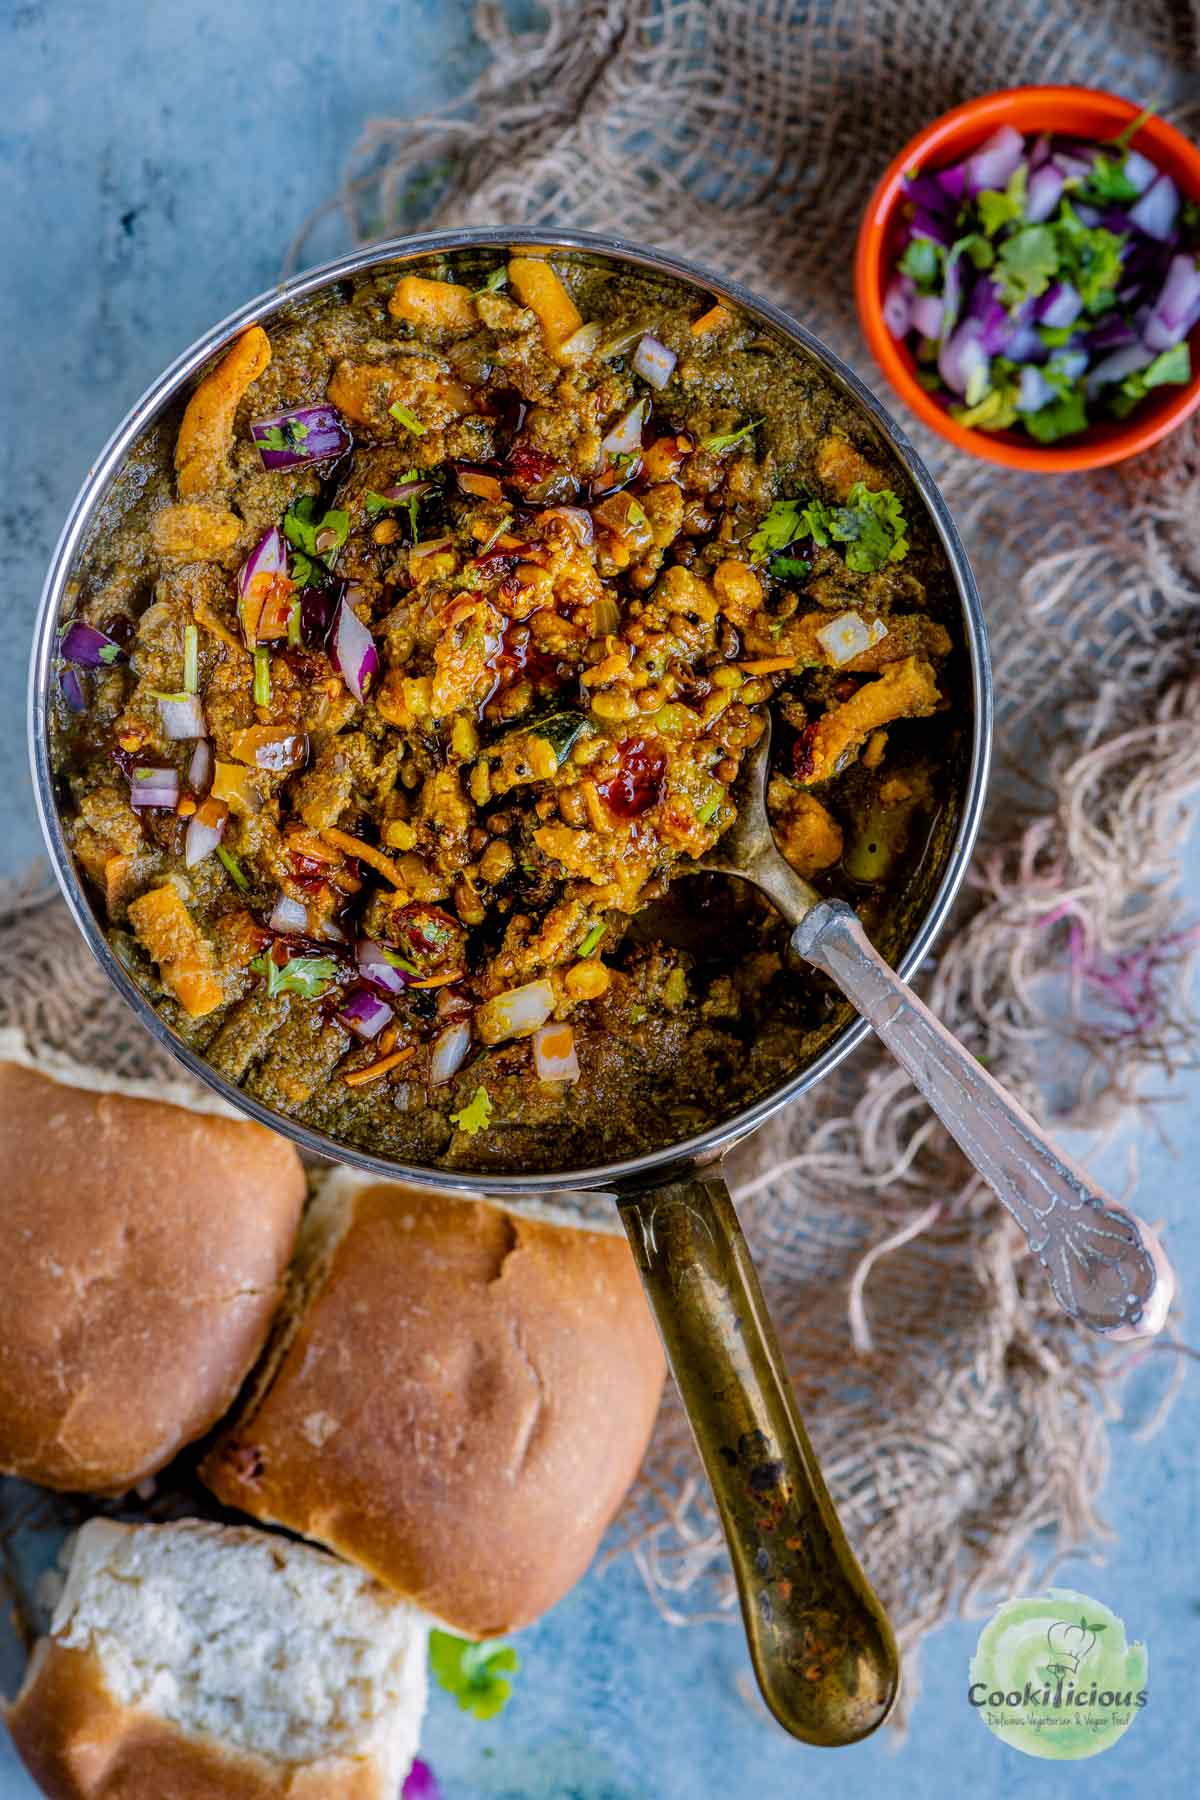 misal served in a round platter with a spoon in it